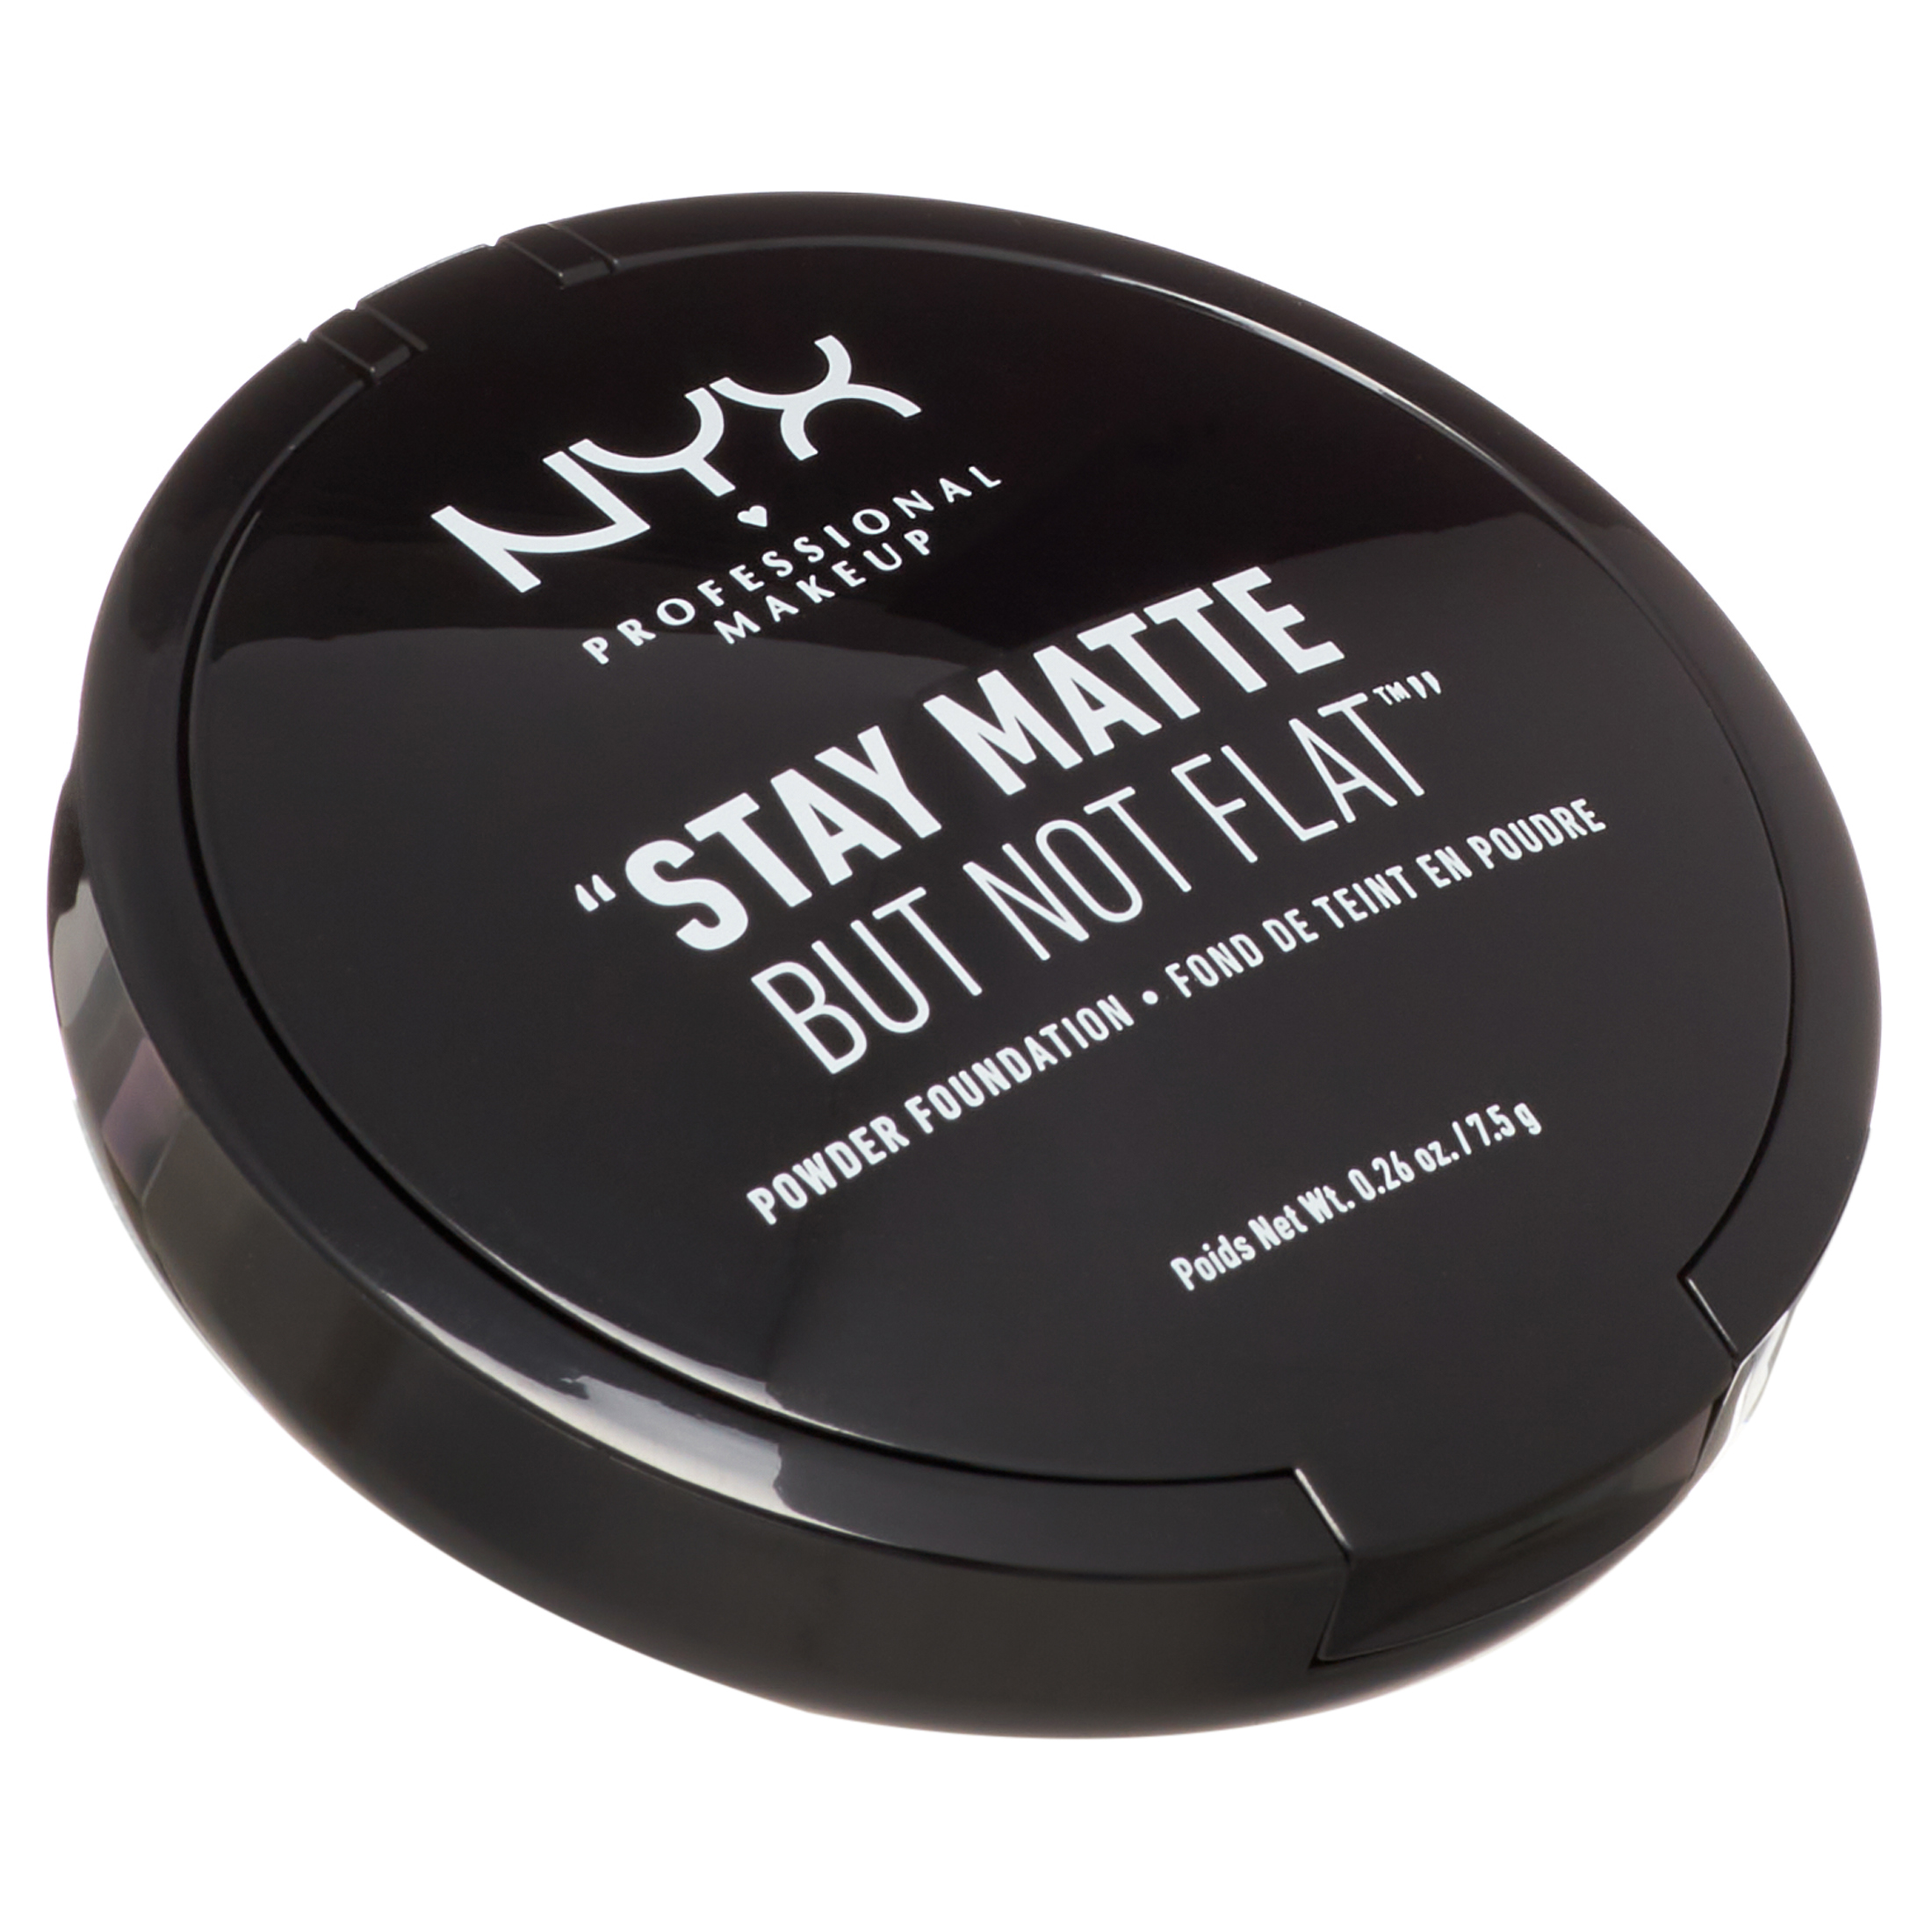 NYX Professional Makeup Stay Matte but not Flat Powder Foundation, Nude 0.26 oz - image 3 of 9